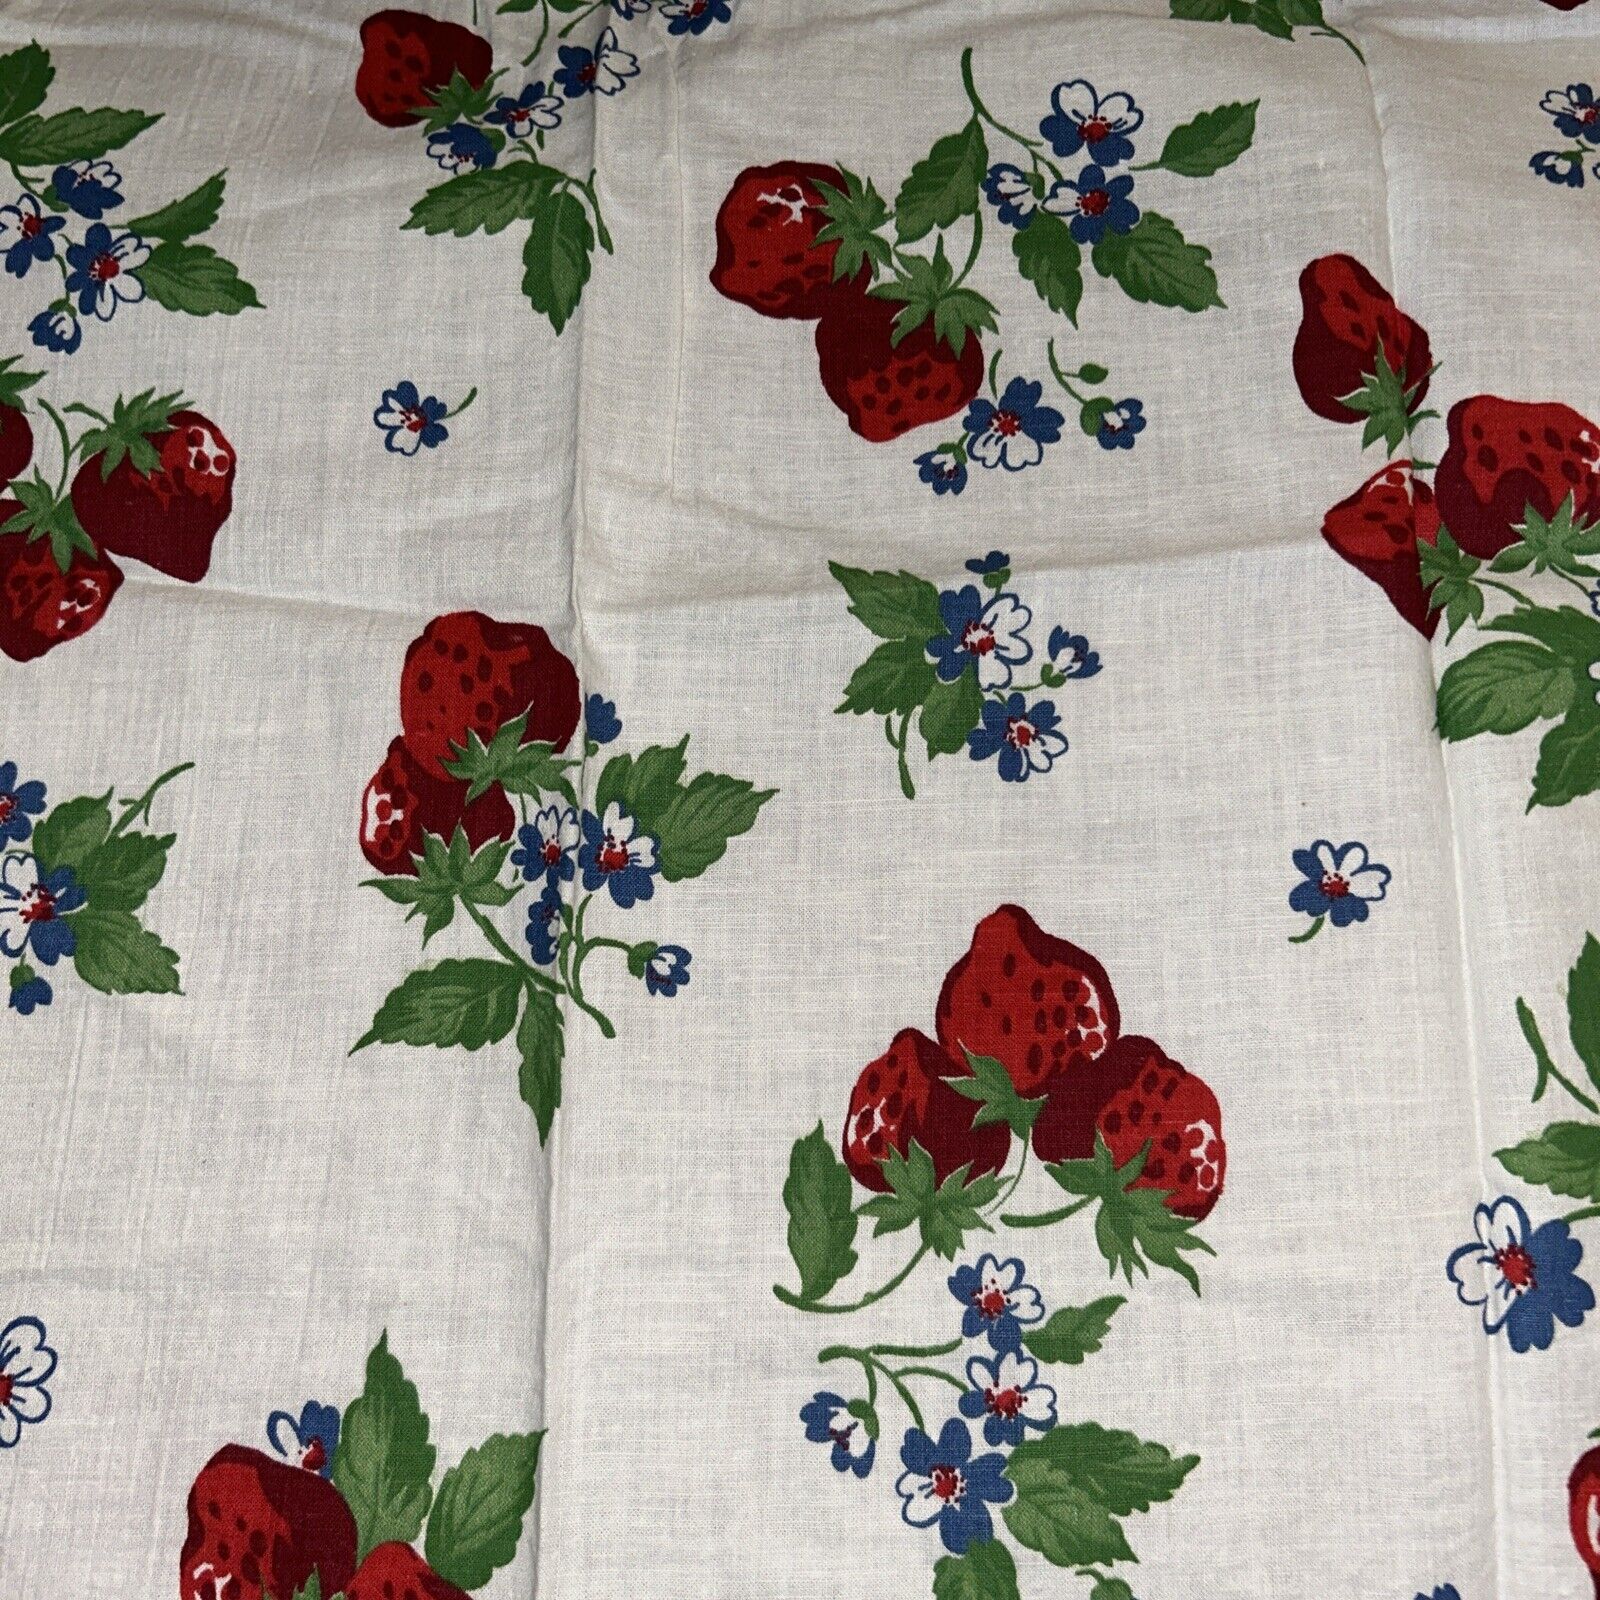 Vintage woven Fabric - Strawberries Print 21x26 In #1